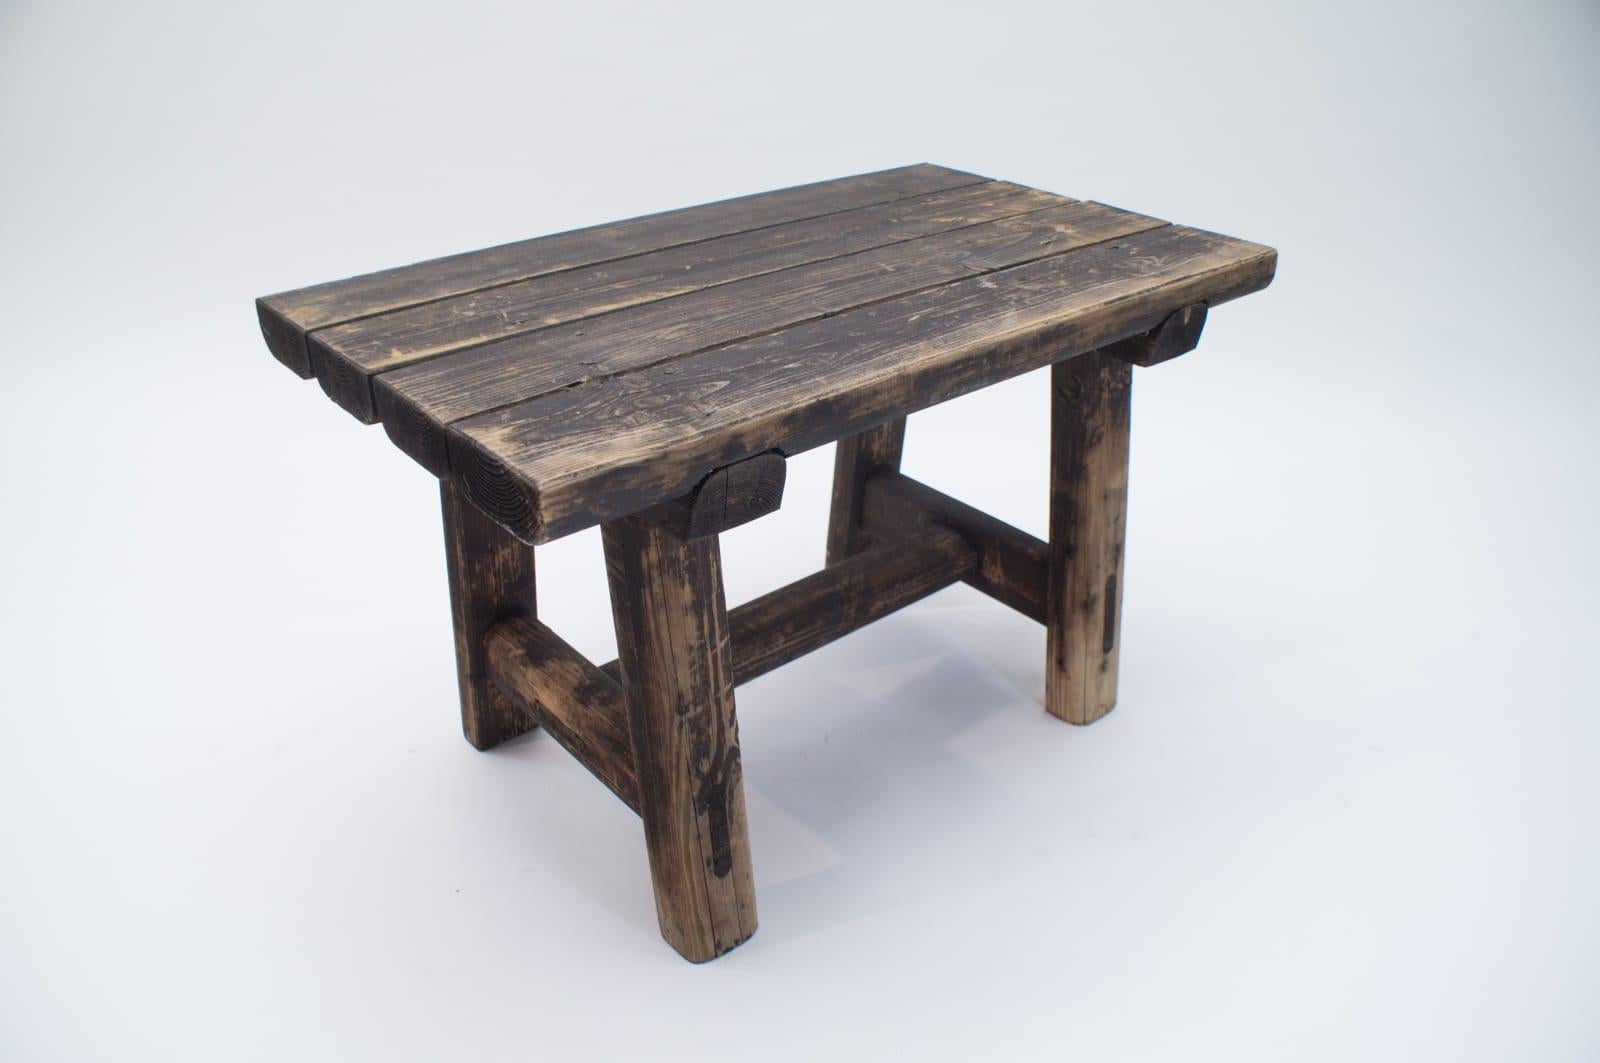 Black Forest Wooden Bench, 1930s-1940s, Germany 1